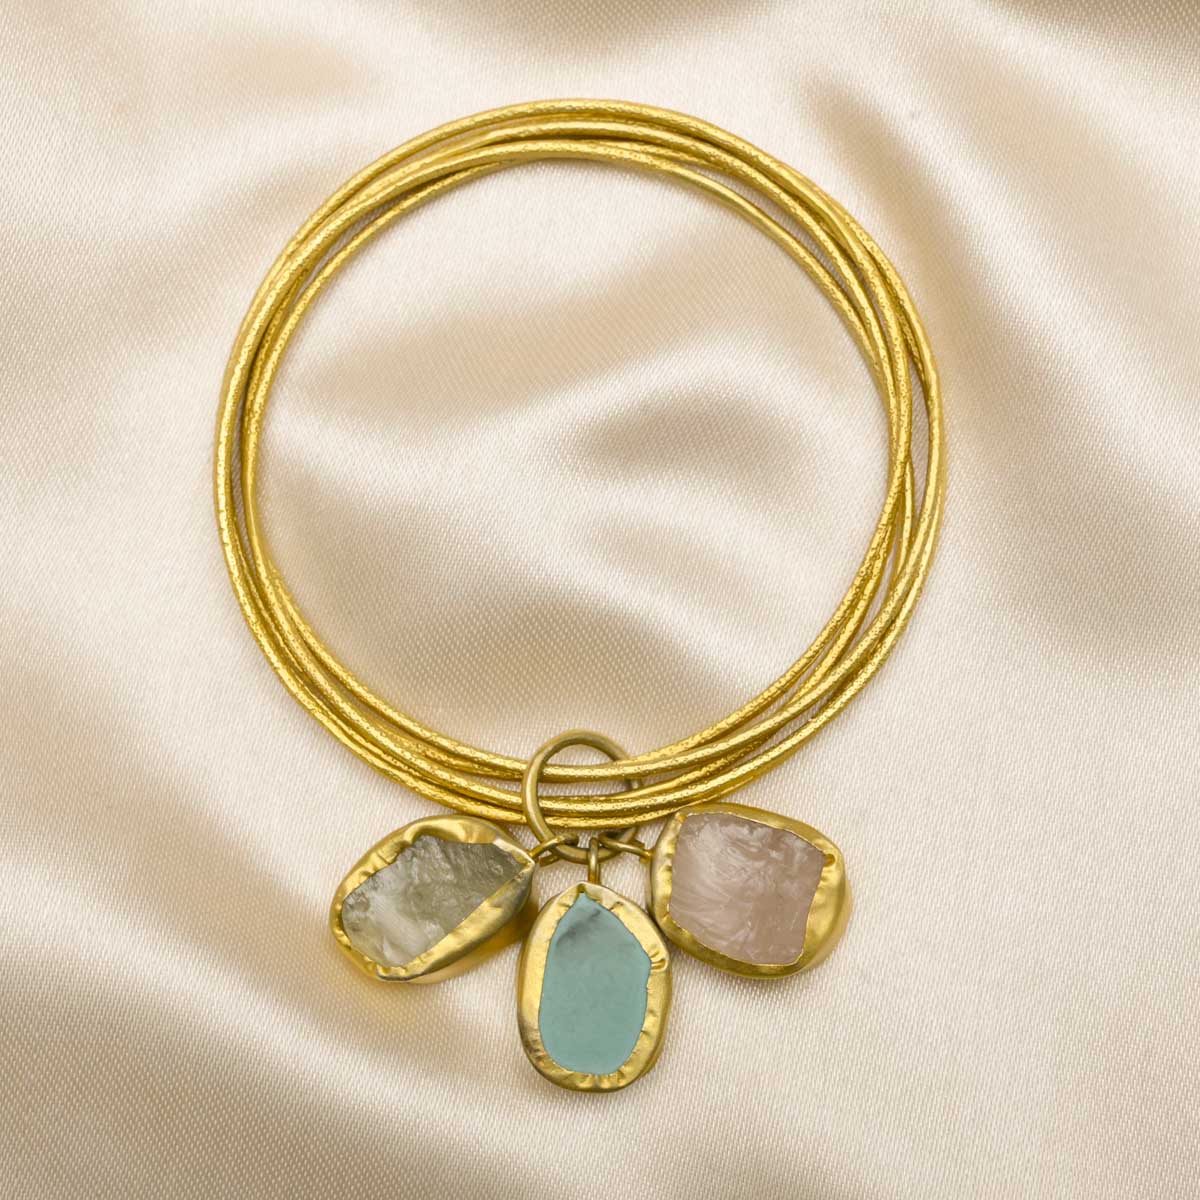 A Tryst With The Wrist Rose Quartz Fluorite Turquoise Gold Bracelet